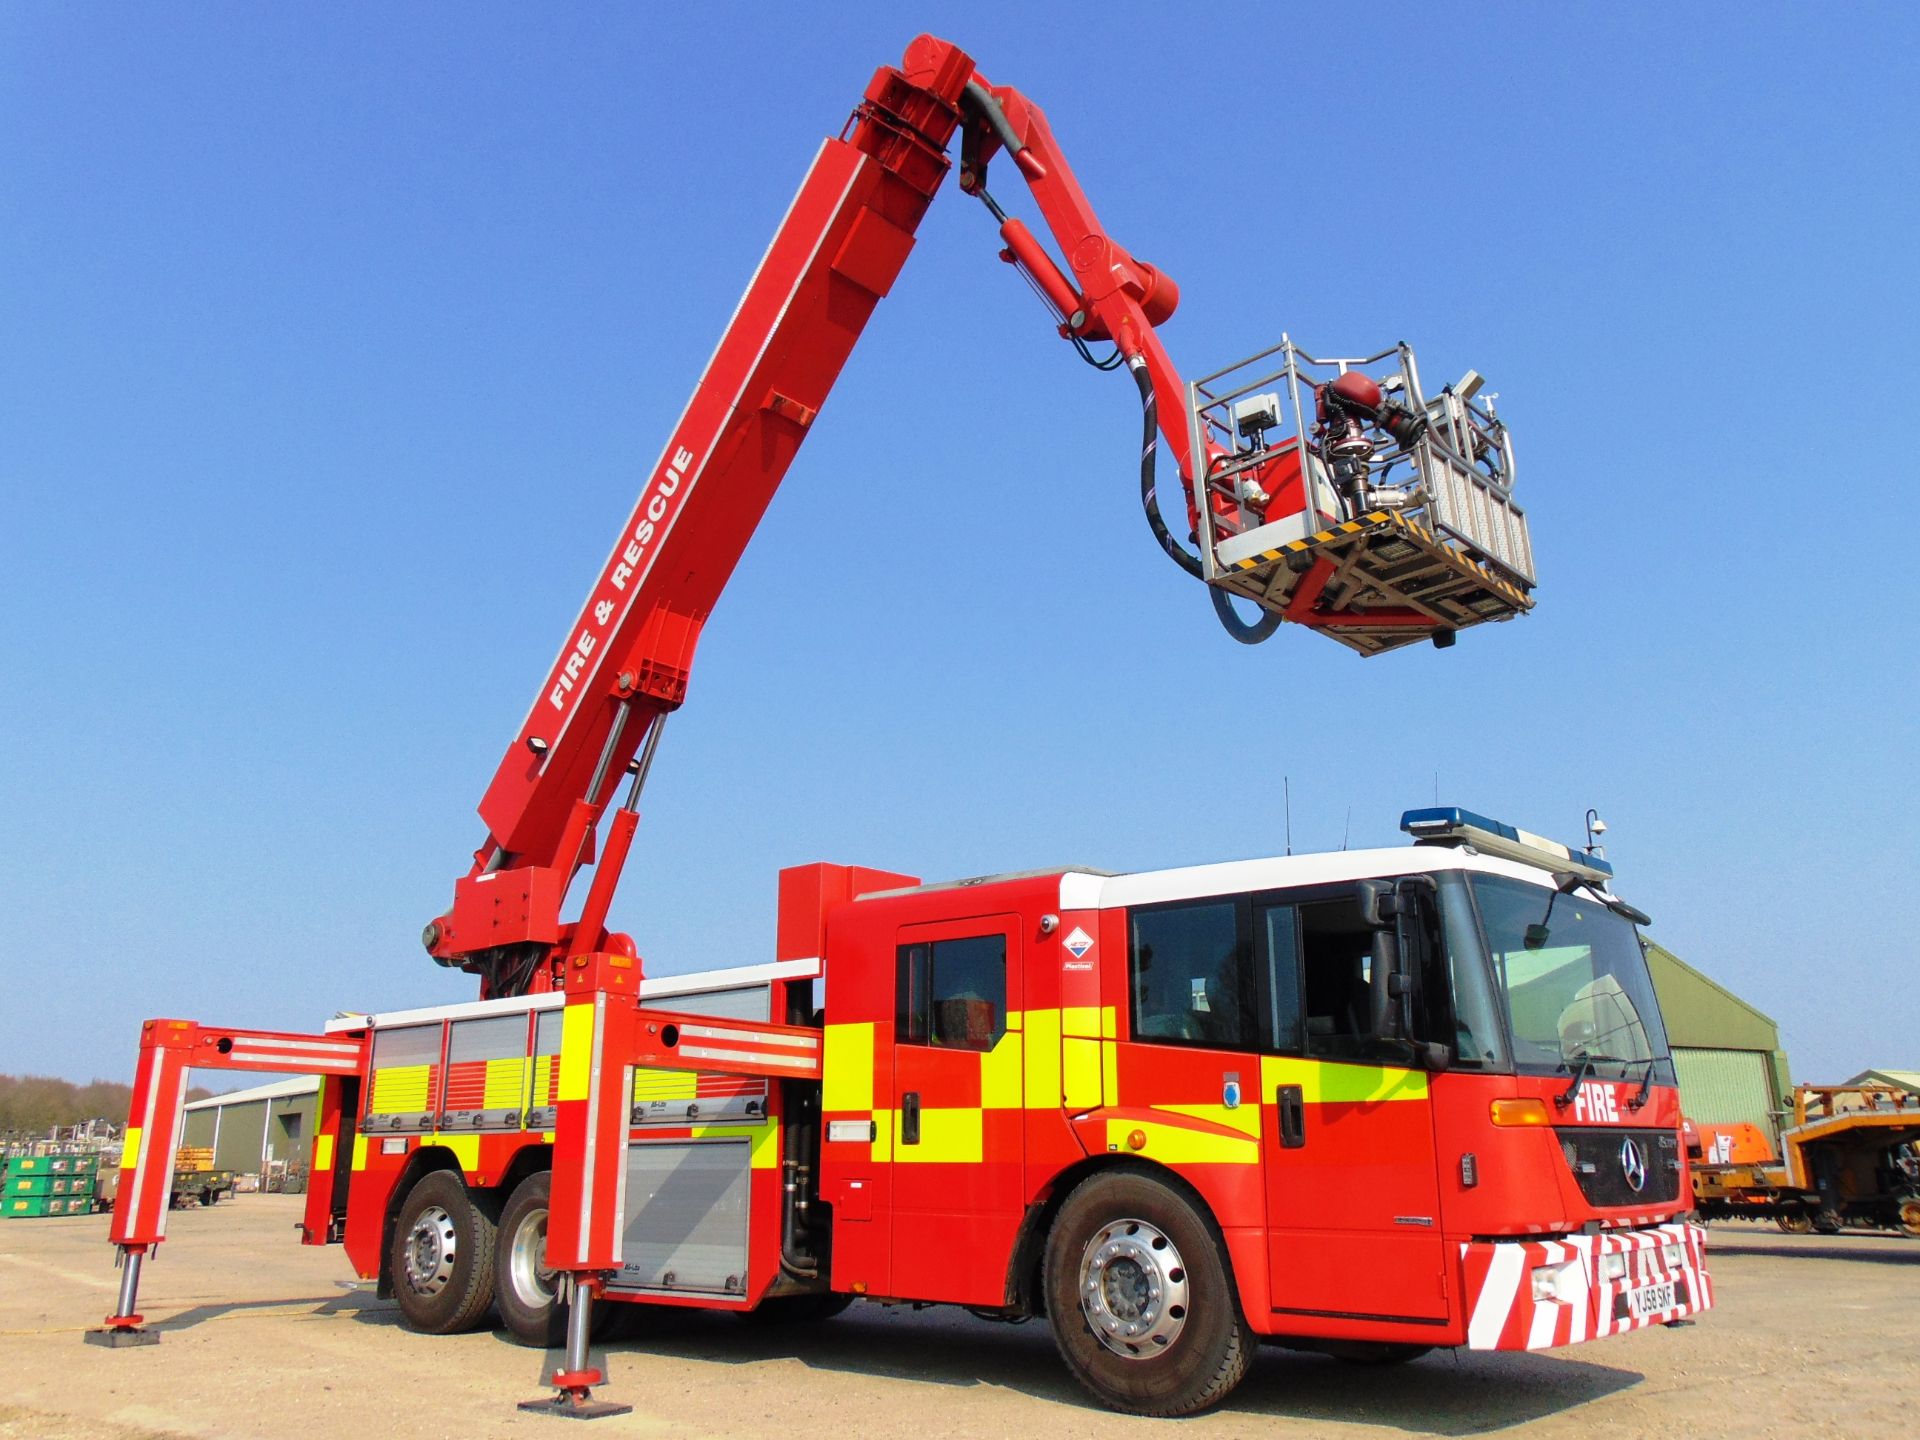 2008 Mercedes Econic CARP (Combined Aerial Rescue Pump) 6x2 Aerial Work Platform / Fire Appliance - Image 2 of 49